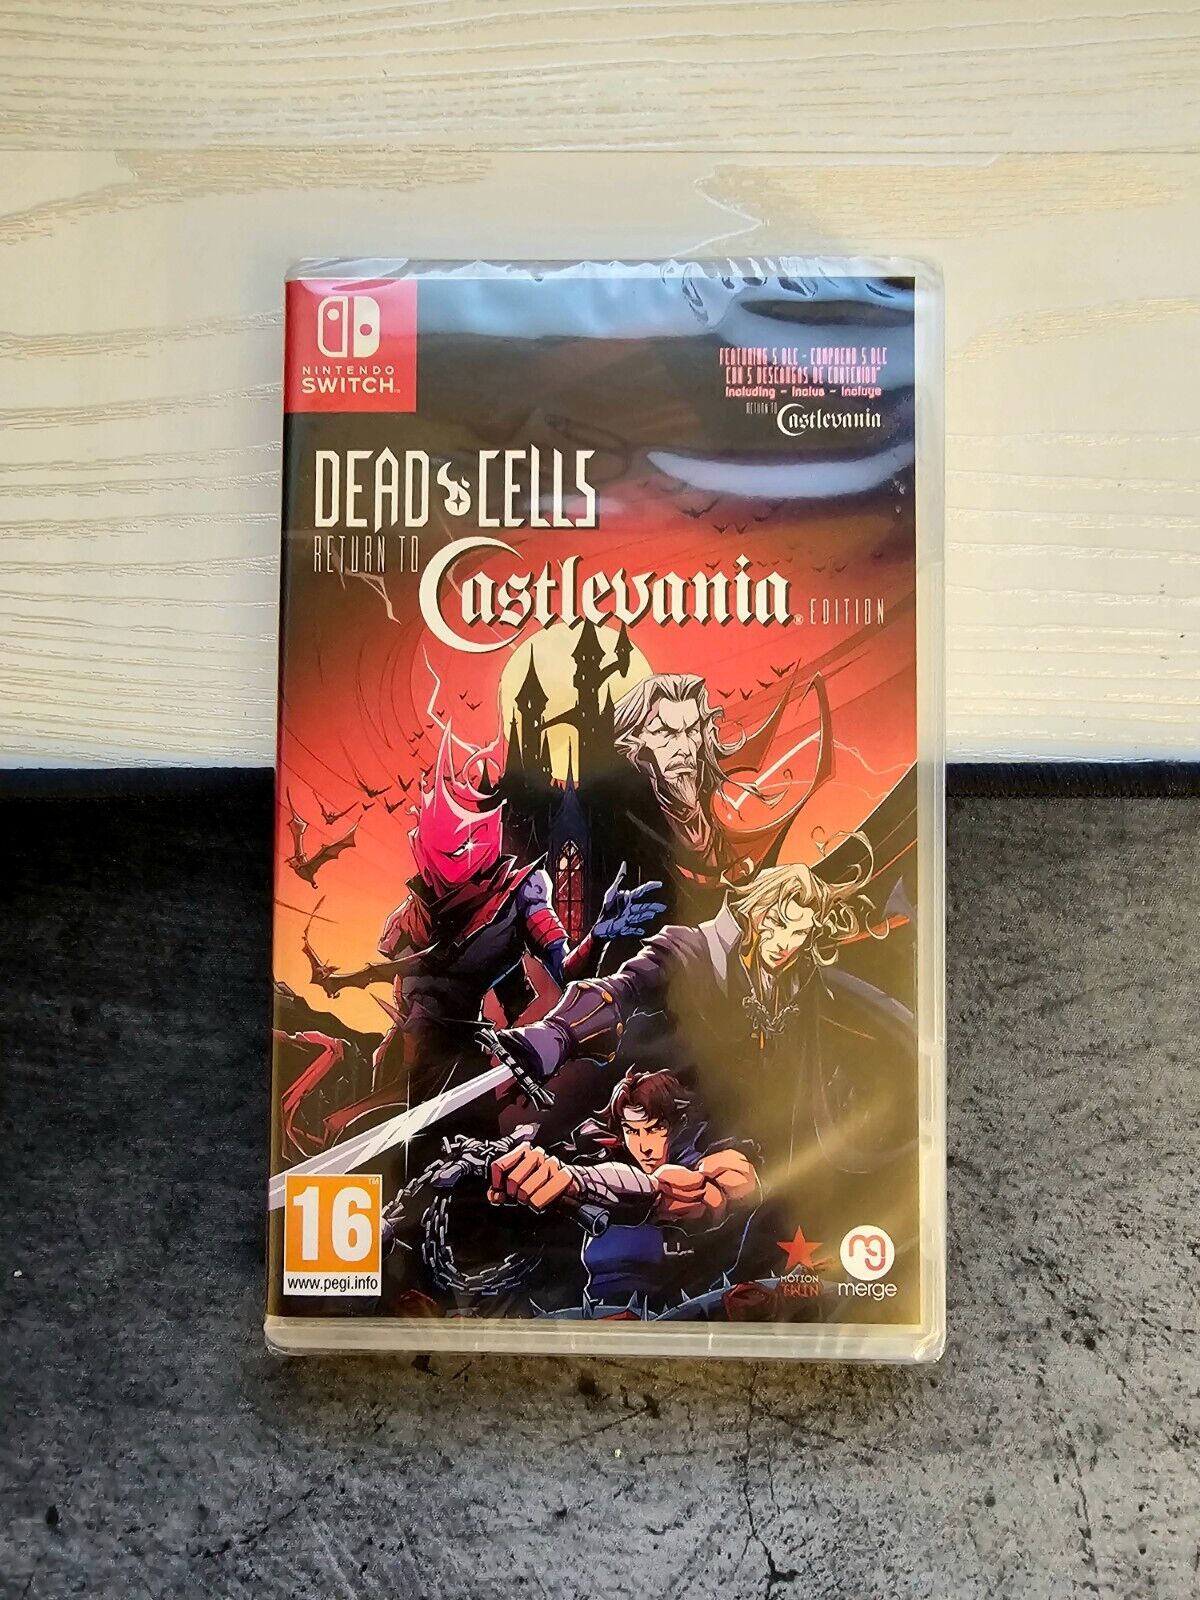 (Brand New) Dead Cells: Return to Castlevania Edition - Nintendo Switch